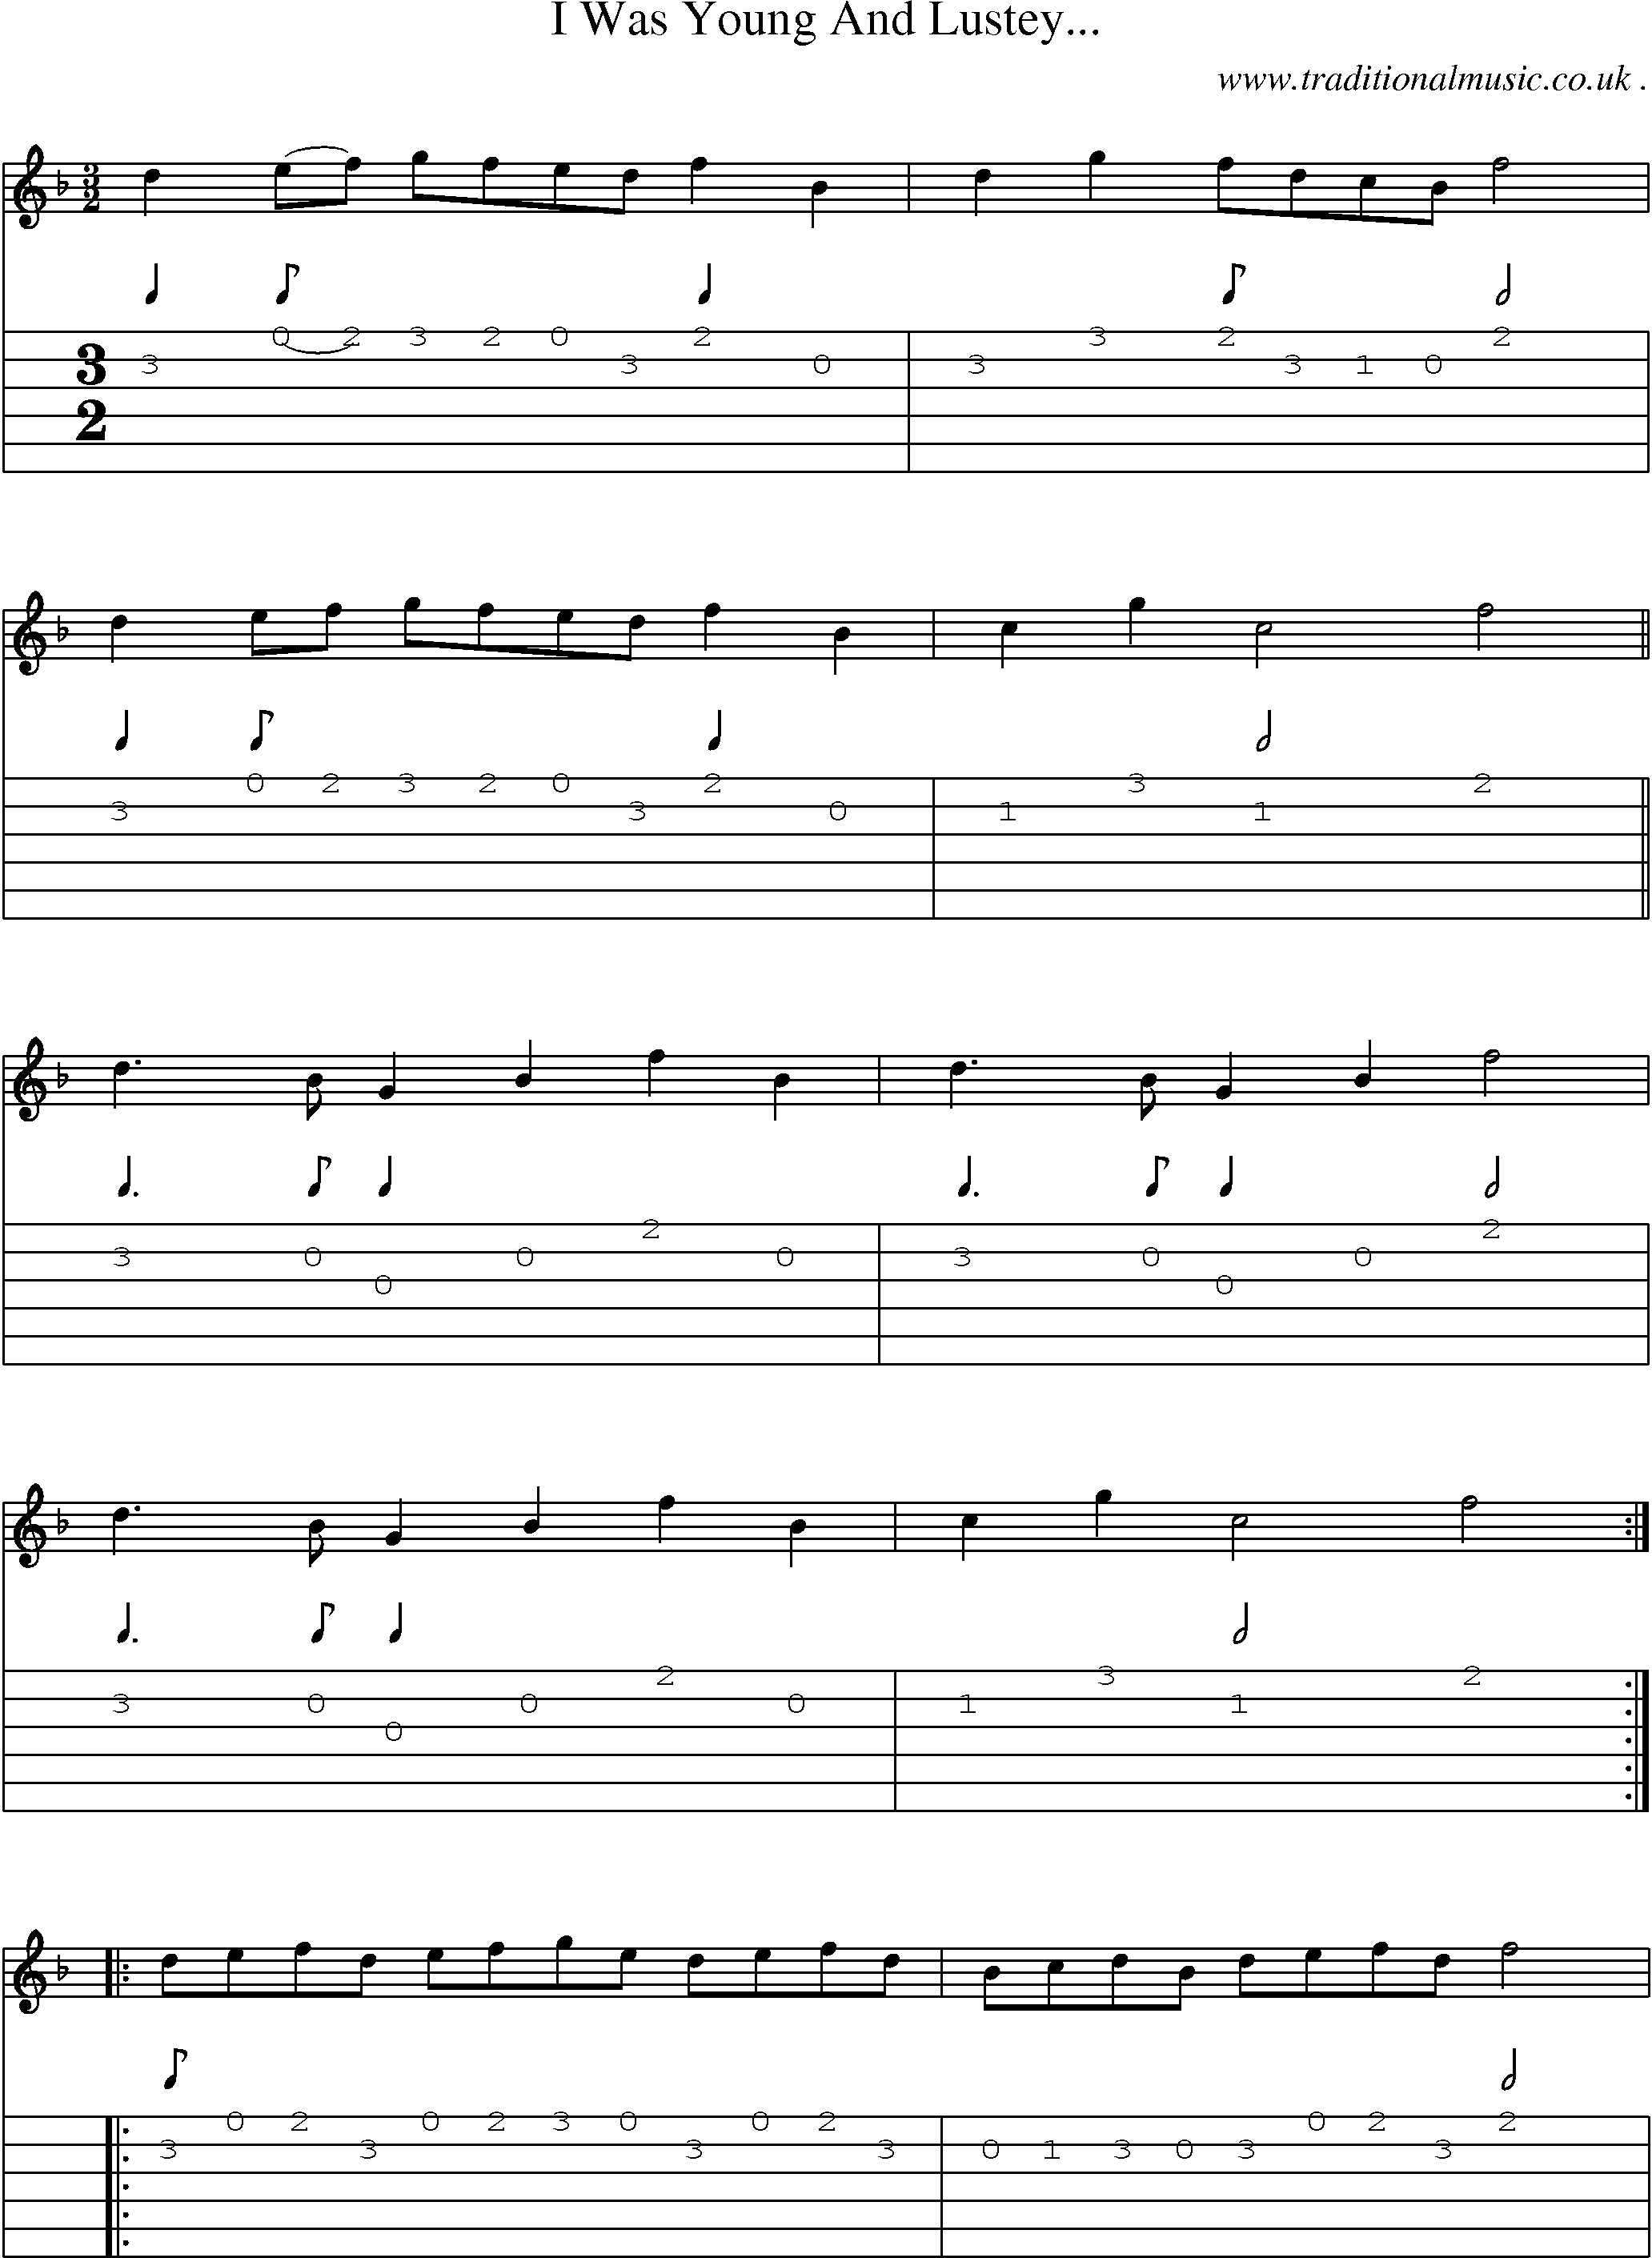 Sheet-Music and Guitar Tabs for I Was Young And Lustey